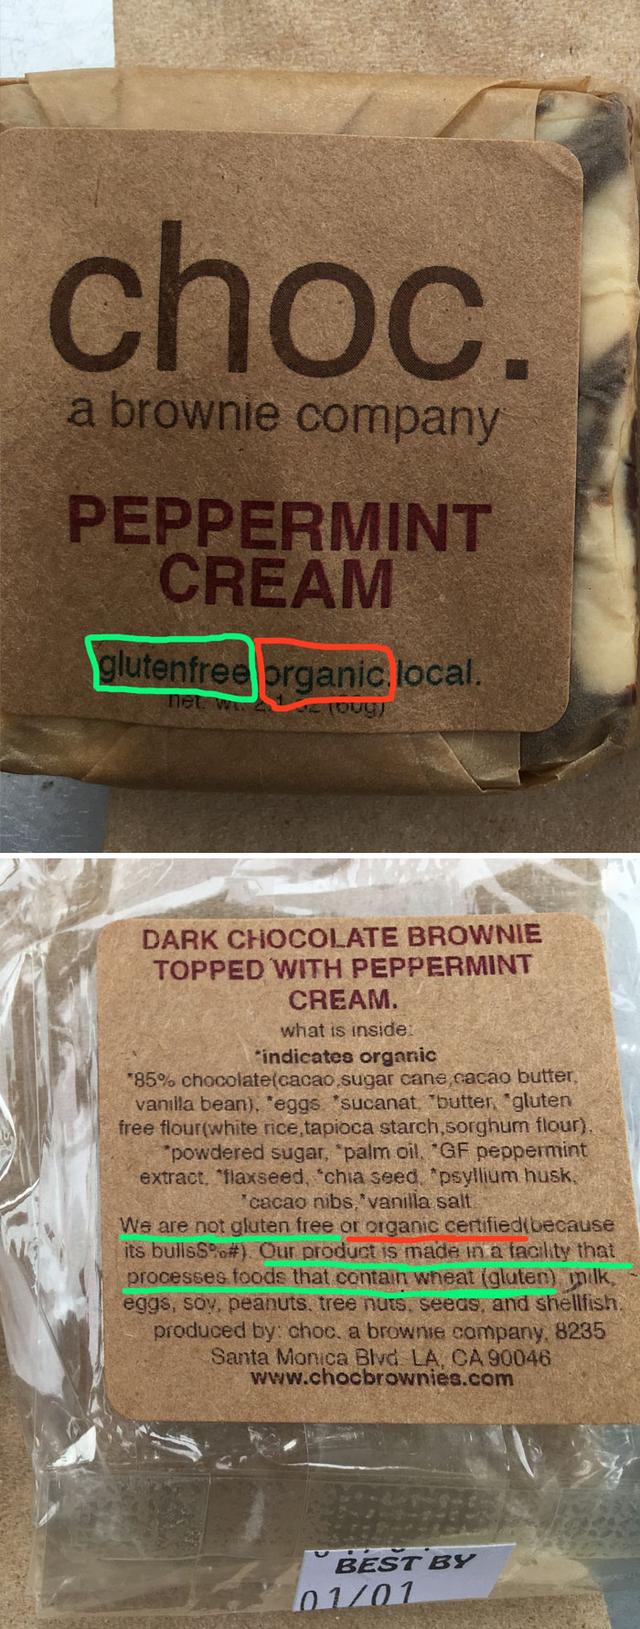 misleading packaging - choc. a brownie company Peppermint Cream glutenfree organic local. net w Coug Dark Chocolate Brownie Topped With Peppermint Cream. what is inside 'indicates organic 85% chocolate cacao sugar cane cacao butter, vanilla bean. eggs "su